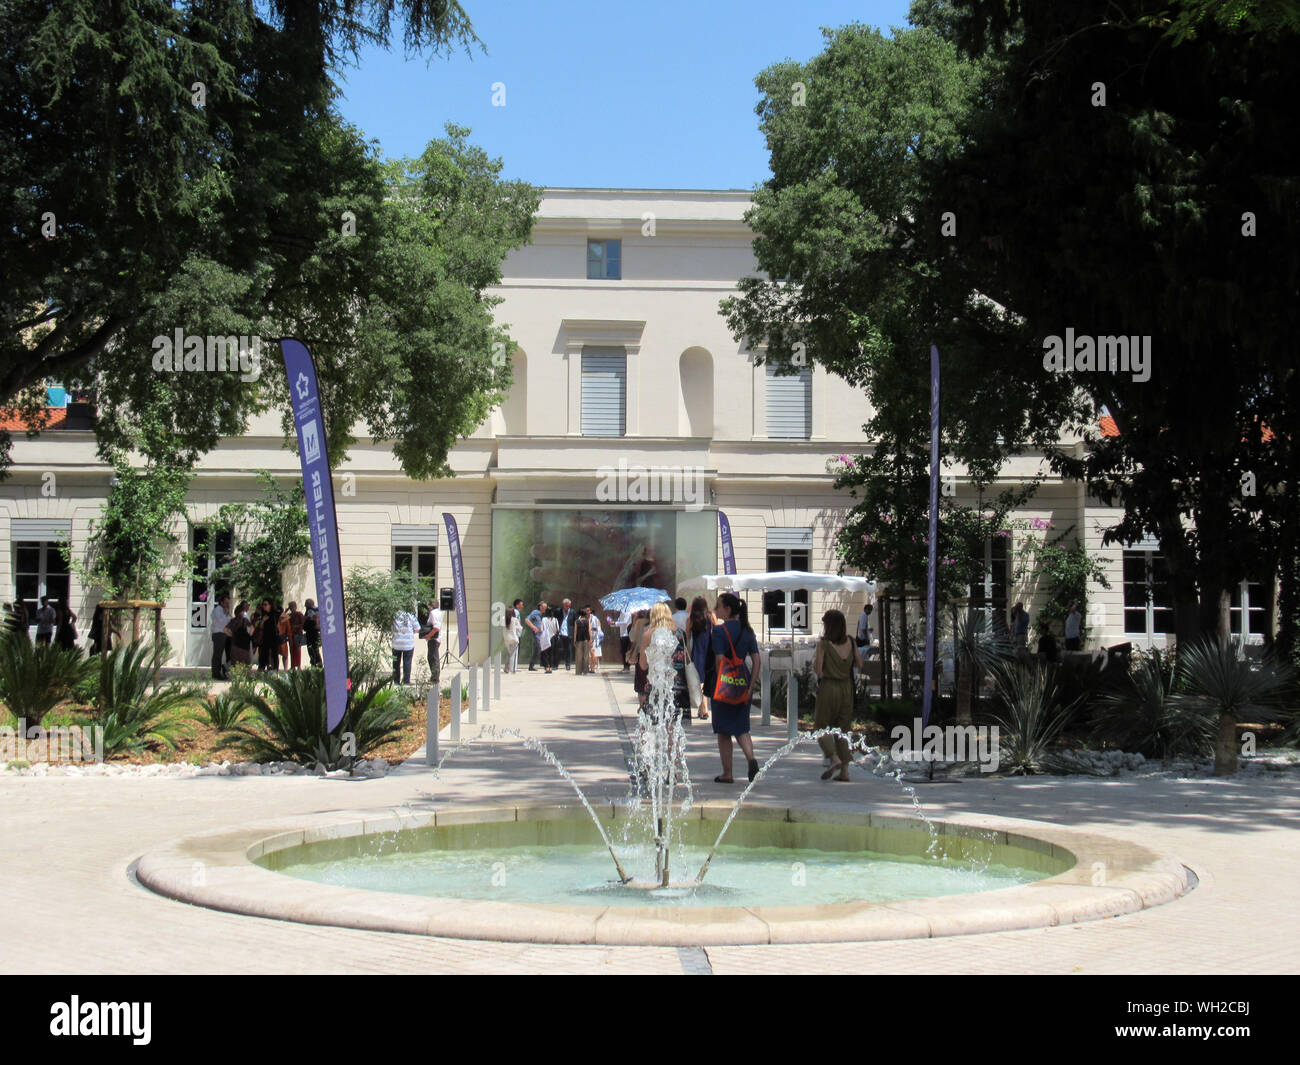 26 August 2019, France (France), Montpellier: The hotel of the collection. collections of private art lovers, companies, artists and also public institutions, which will preferably be shown for the first time. In times of scarce financial resources, museums are increasingly showing the art treasures of private collectors. (to dpa 'Montpellier dares controversial concept: a museum for private collectors') Photo: Sabine Glaubitz/dpa Stock Photo